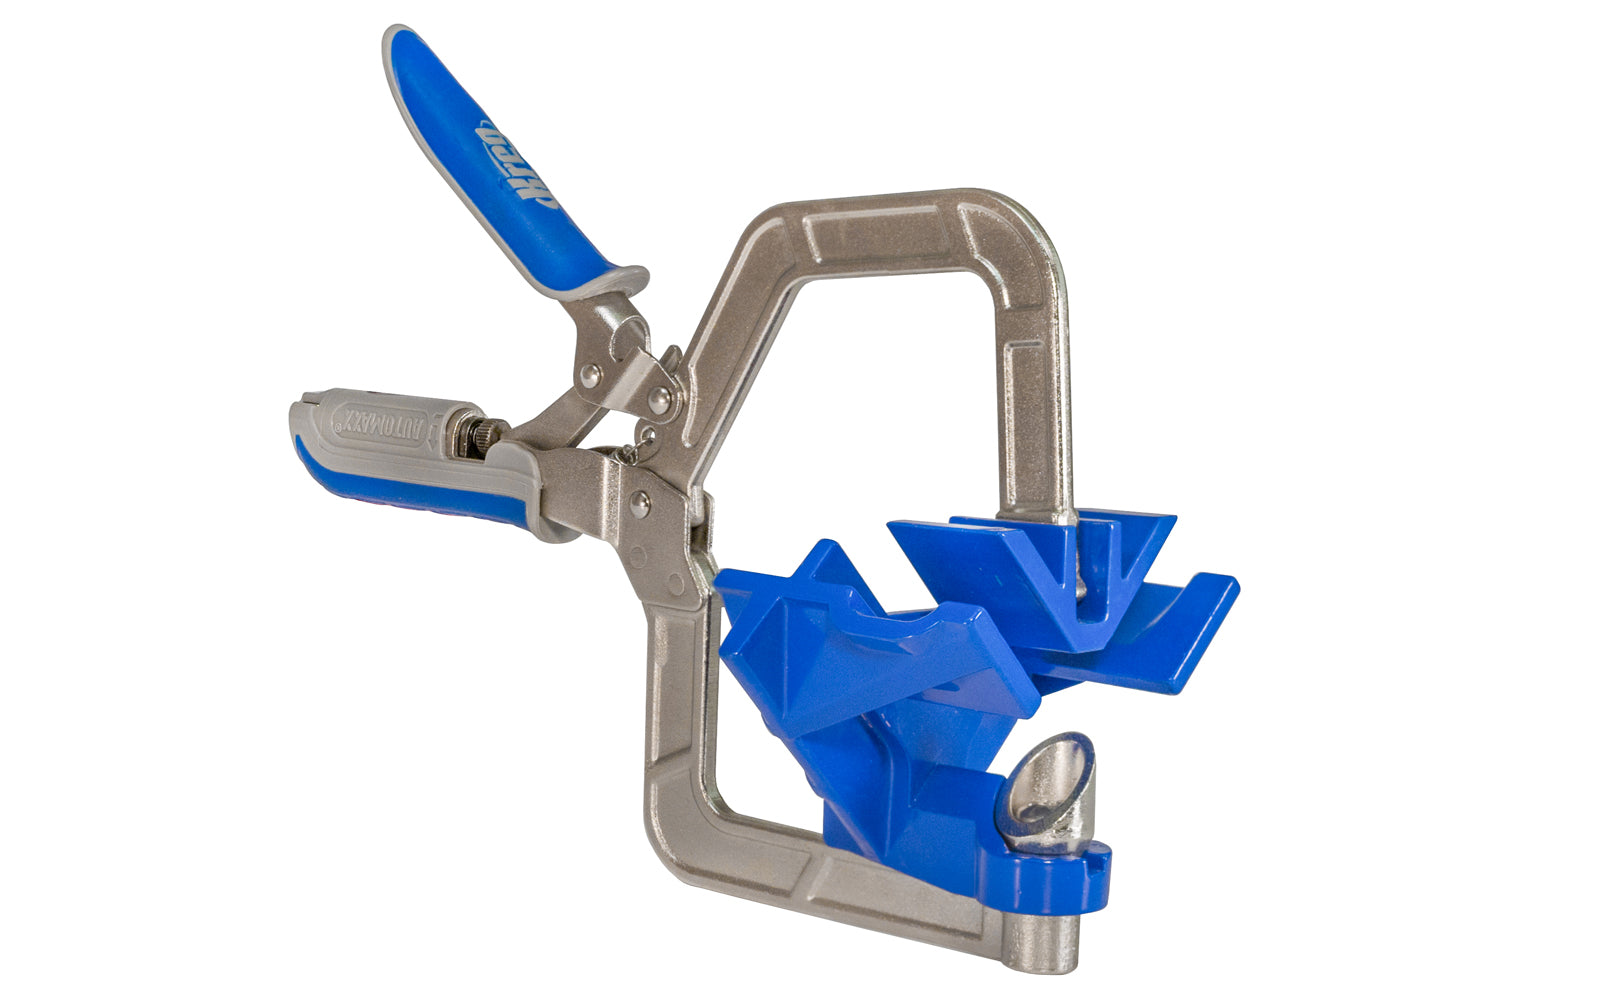 The easy way to hold 90° corners & "T" joints in boxes, cabinets & cases - Model No. KHCCC - Cutout allows driving a pocket-hole screw without removing clamp - Cast aluminum "V" wedge clamp pads - Clamp features adjustment knob for built-in pressure control - Clamps materials up to 1" thick - 90 degree corner clamp